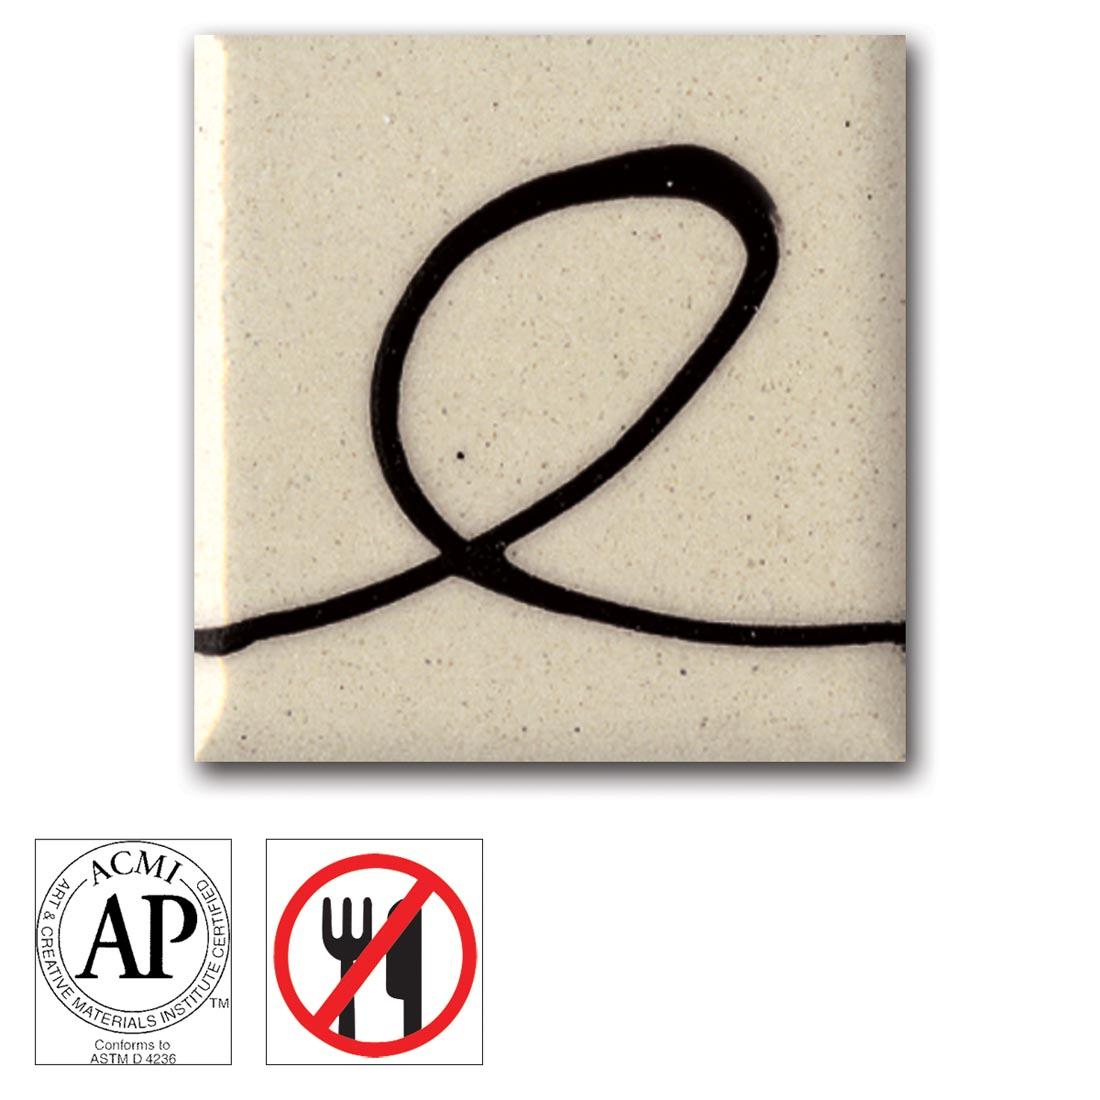 Clay tile with Mayco Black Designer Liner applied; symbols for AP Seal and non-food safe